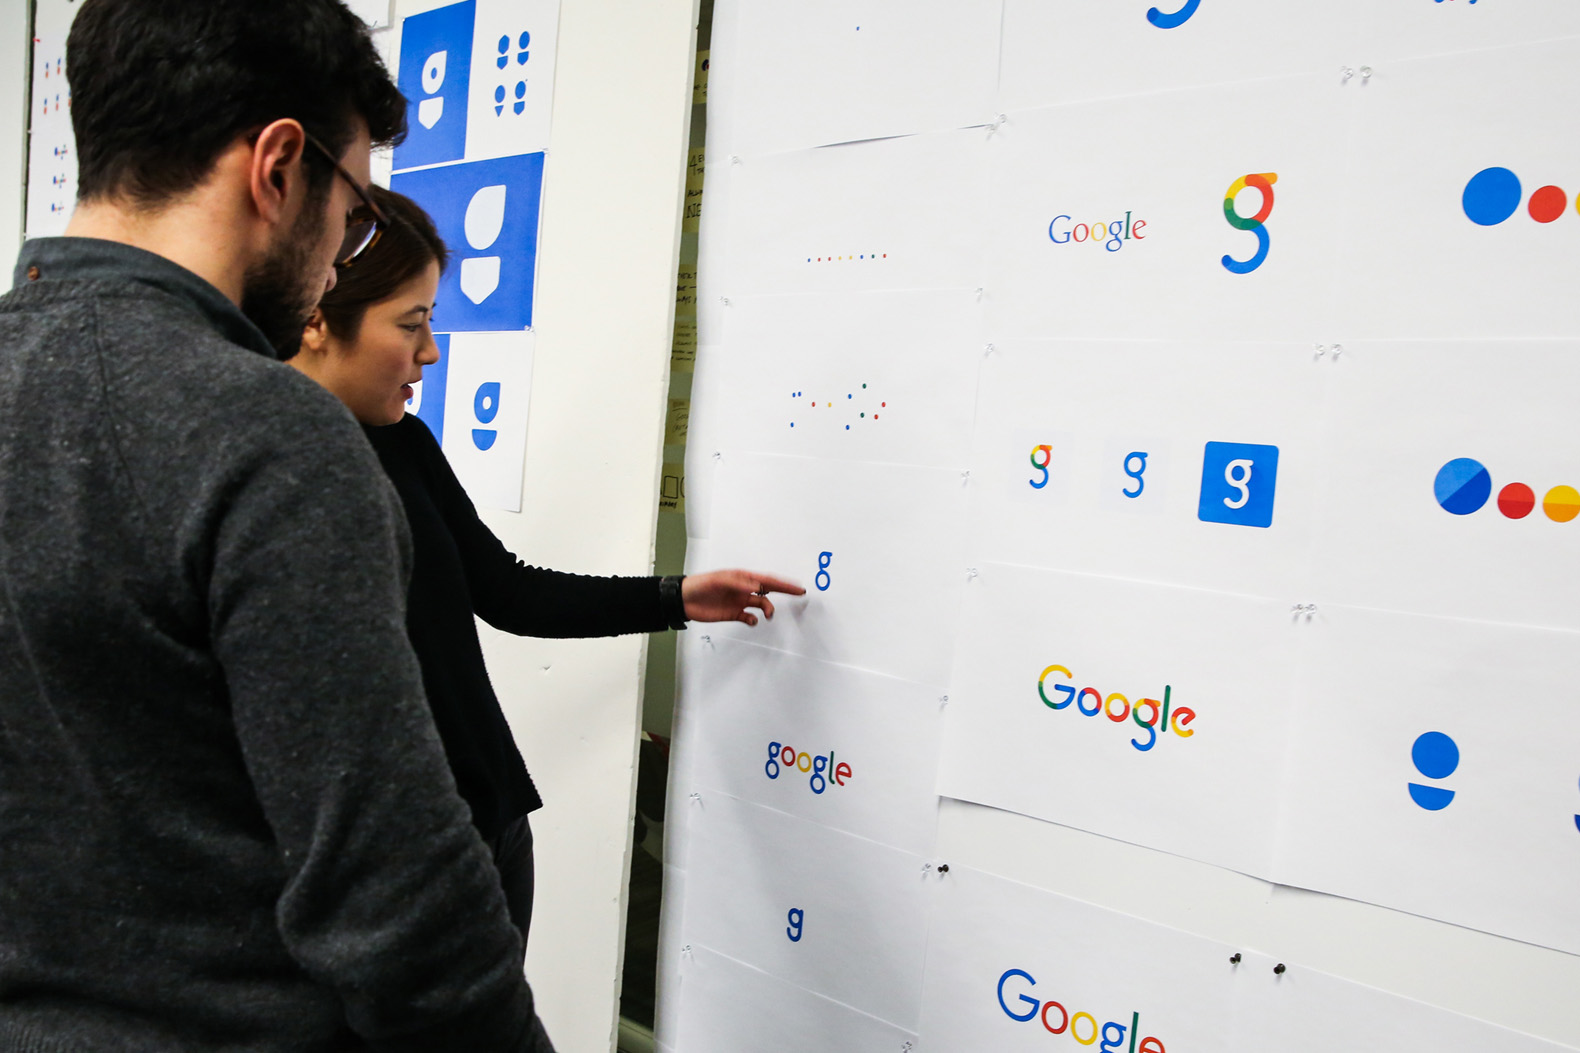 Google Design Jobs - Learn About Applying